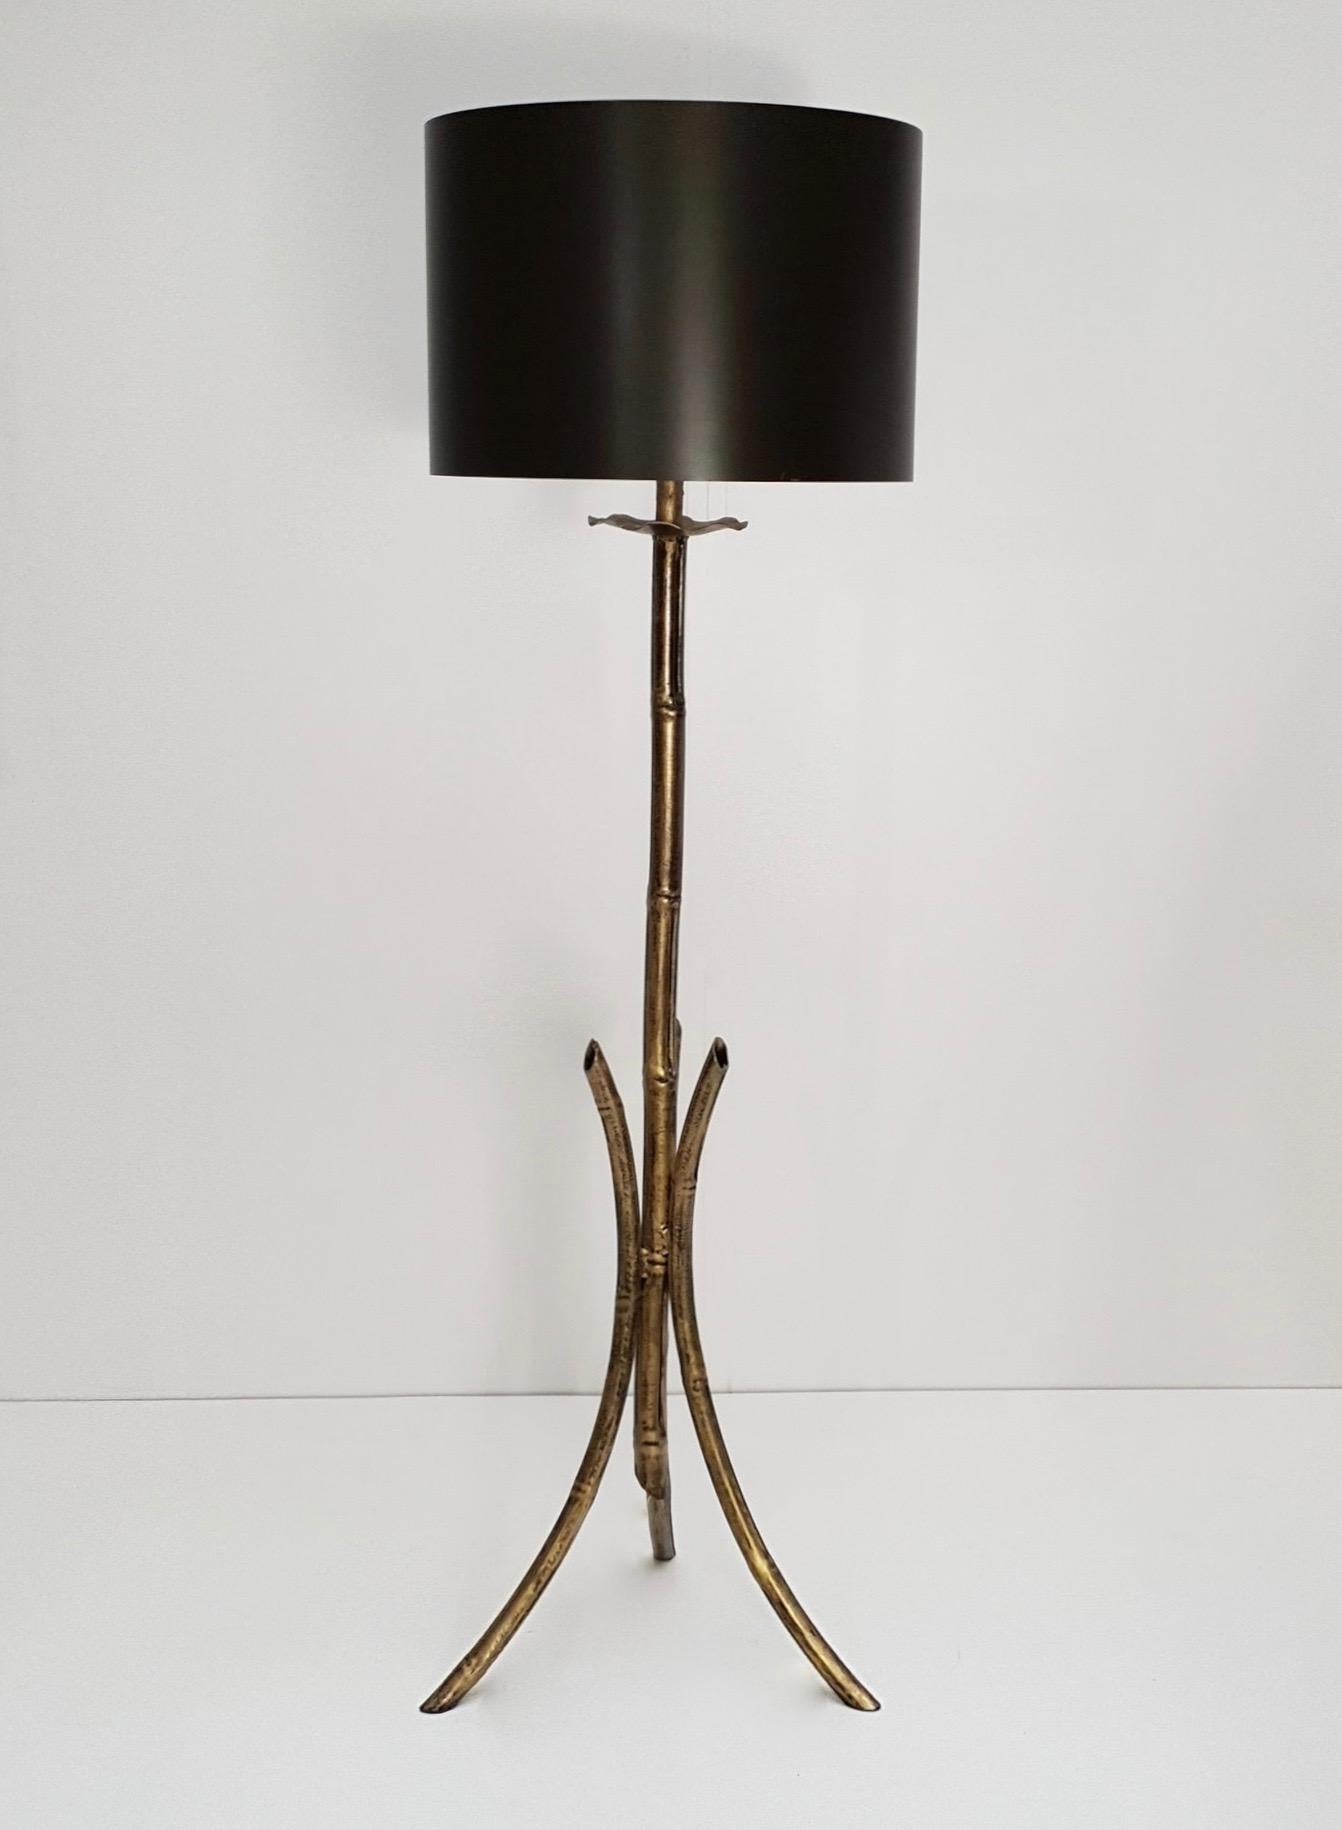 Elegant brass faux bamboo floor lamp, probably French, circa 1950s. Retains warm original patina.
The iron has been delicately hammered to produce the feeling of bamboo.

Lamp shade is not included in the price.

Measures: Height with shade is